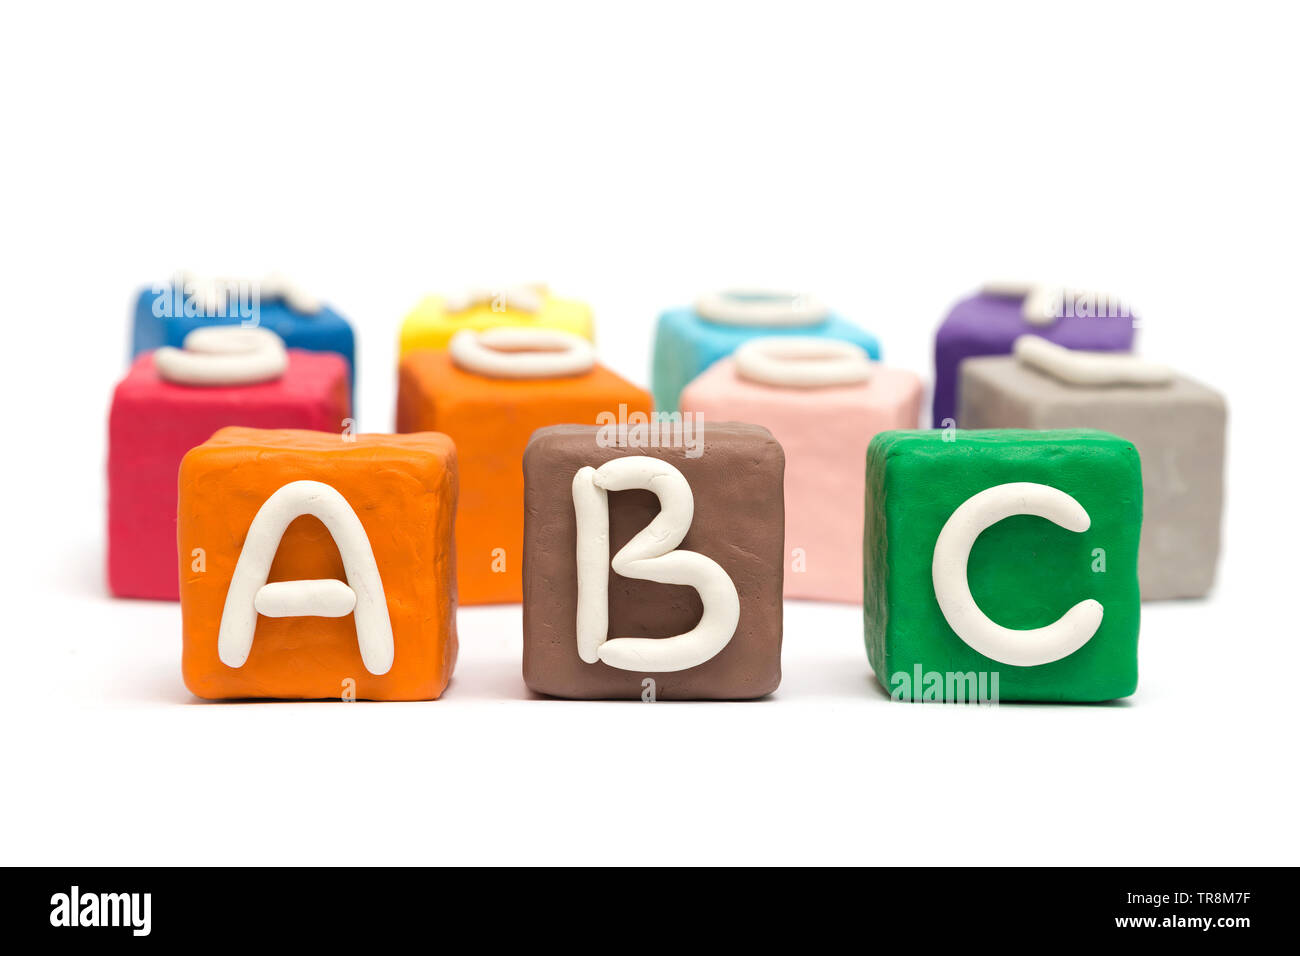 Blocks made of modeling clay with letters A B C Stock Photo